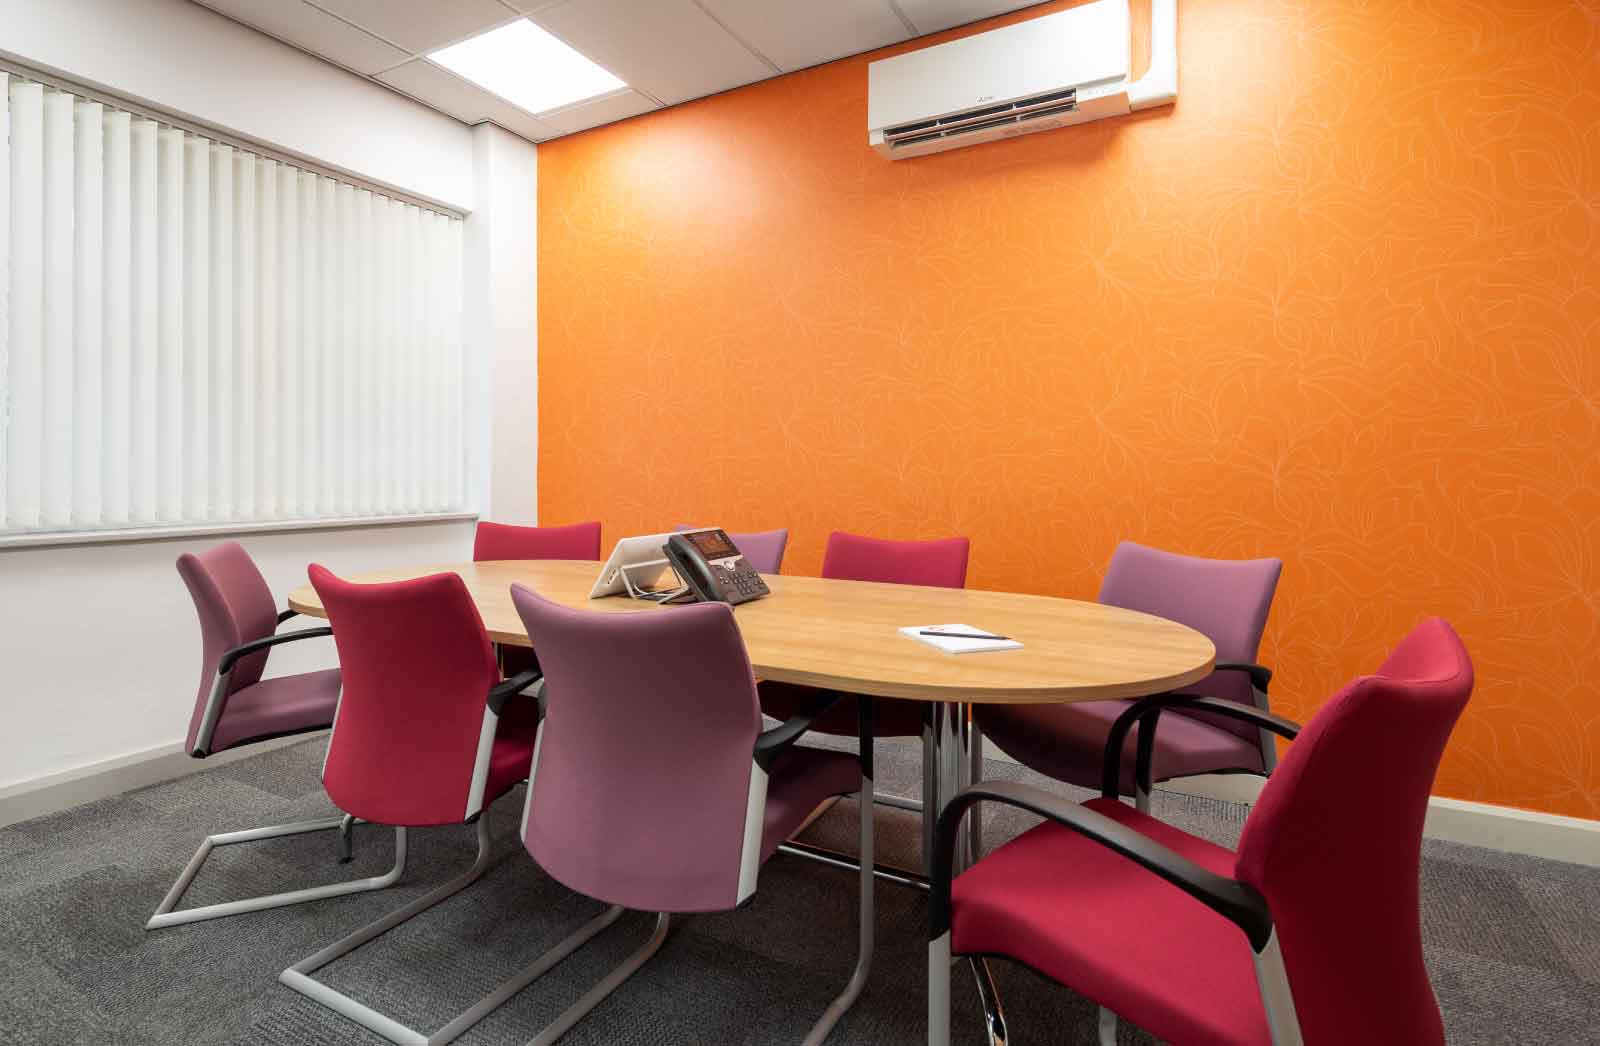 Gordons-Office-Fit-Out-Bradford-Meeting-room-design